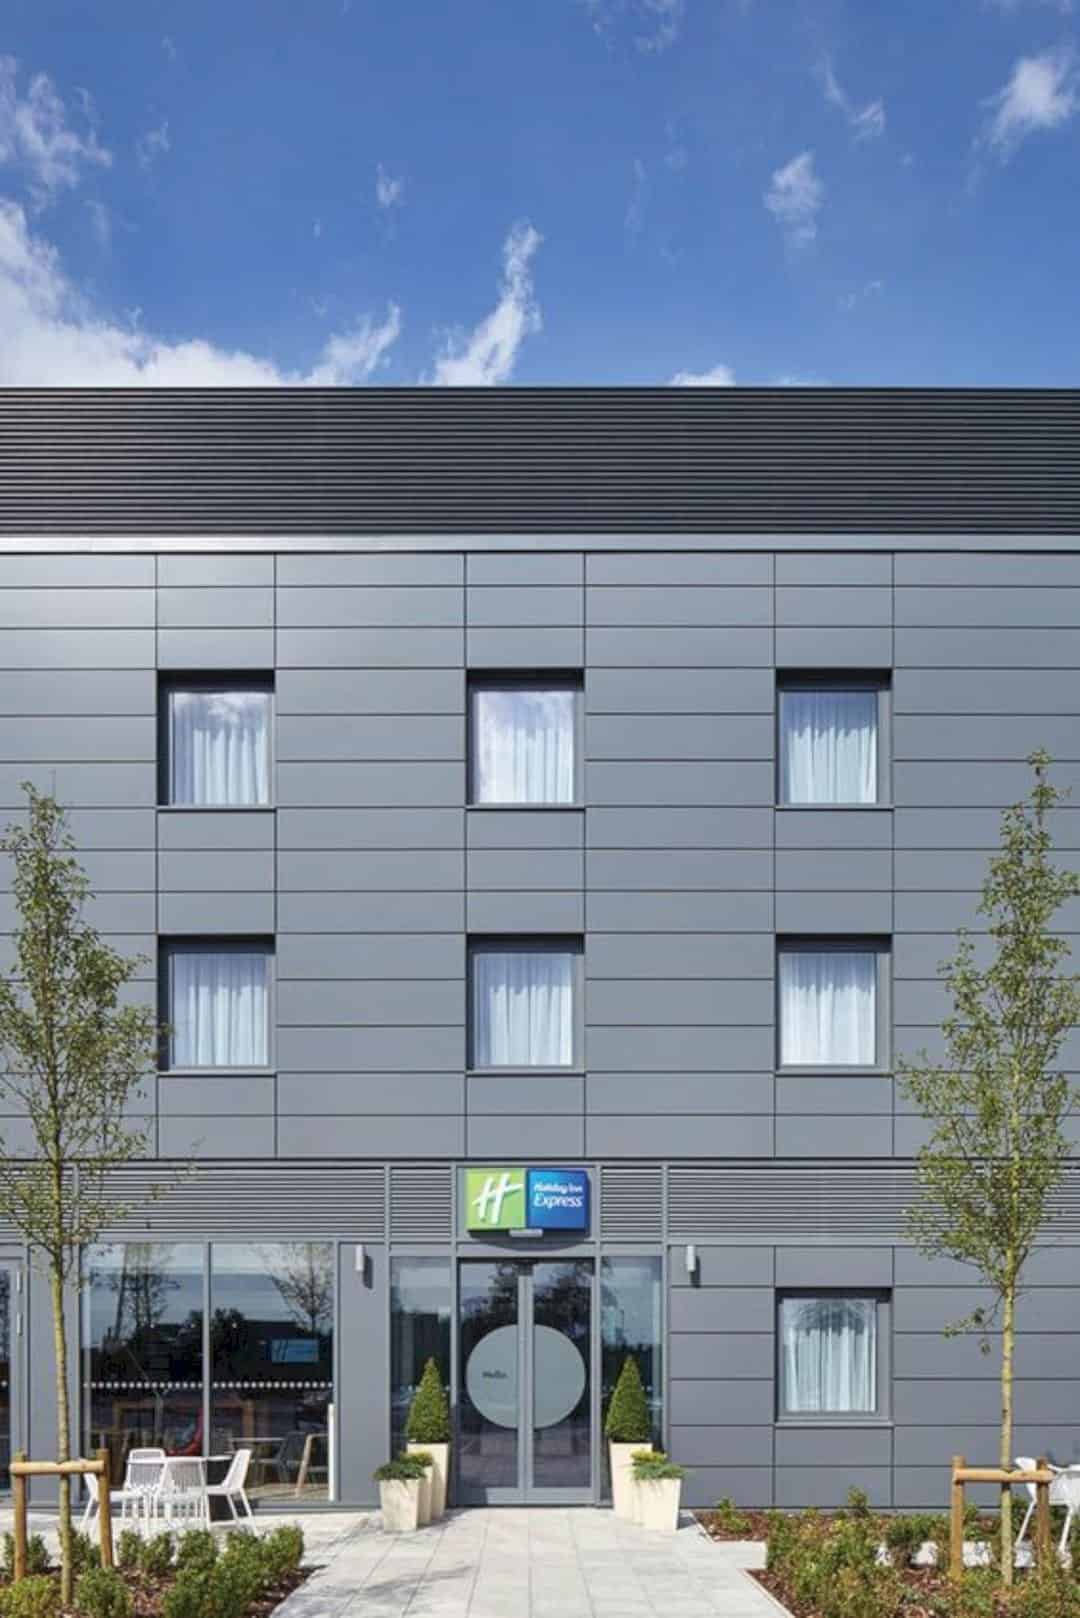 Holiday Inn Express St Albans An Open Lobby Hotel With Imporved And Expanded F & B Offering 4